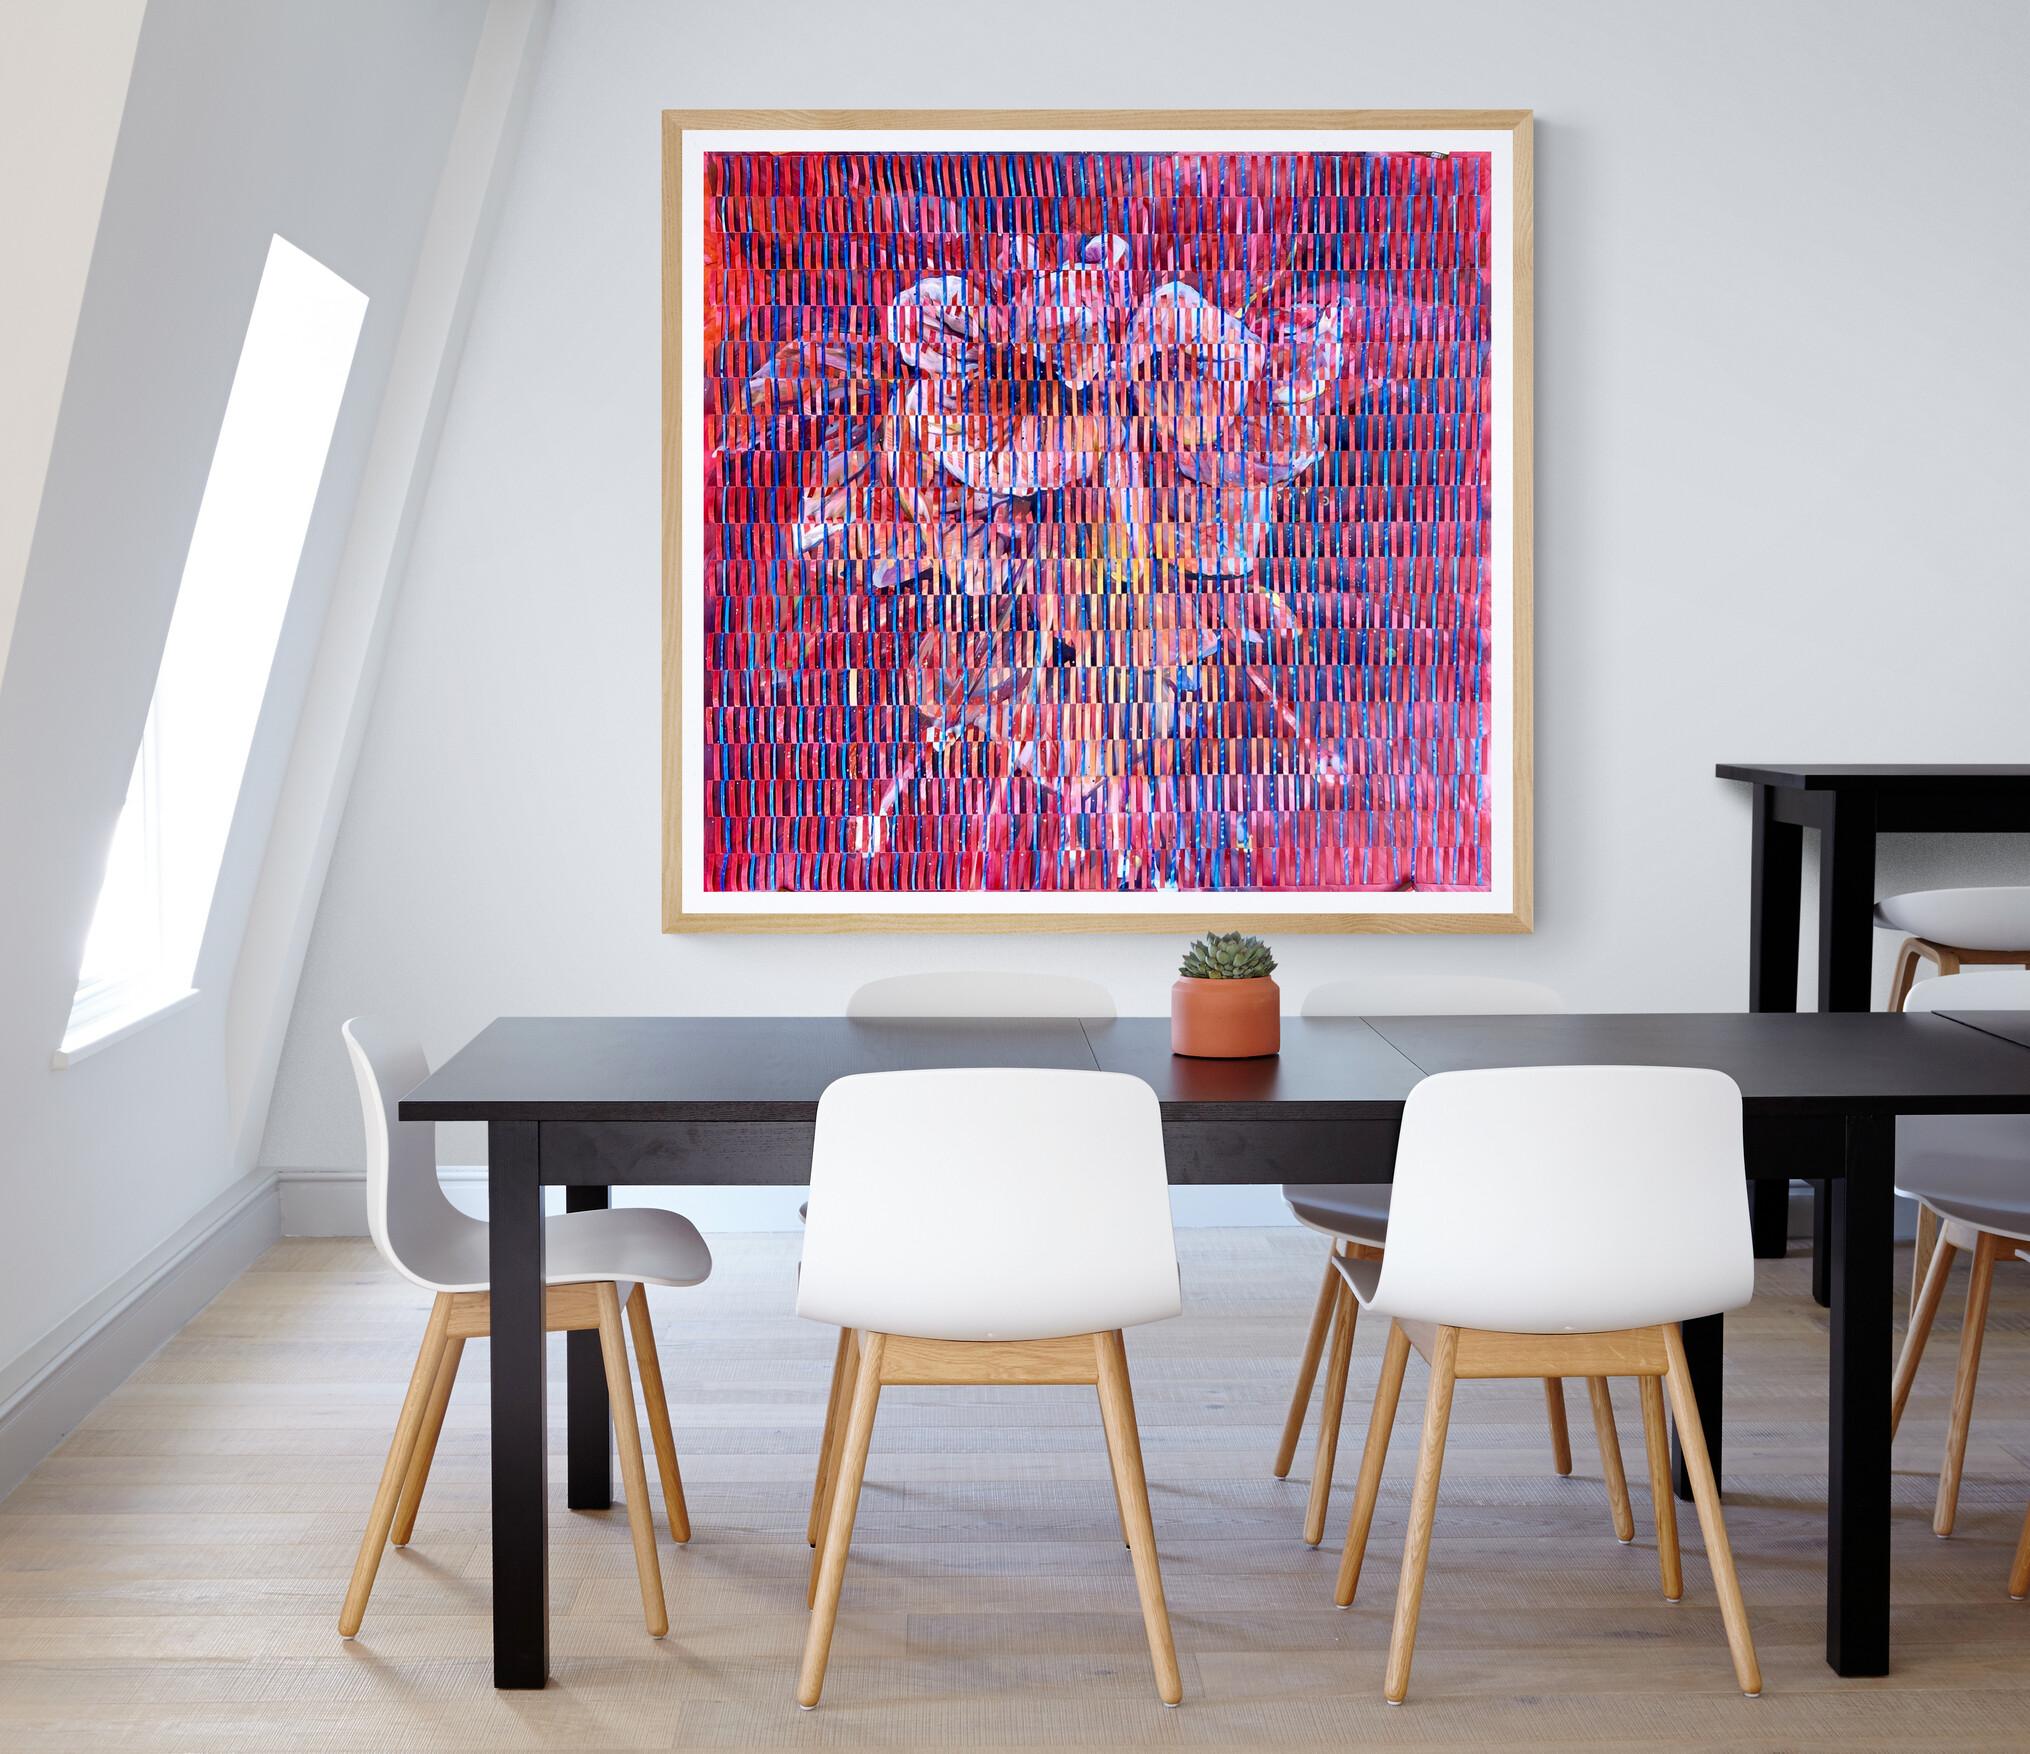 This unique artwork is created through interweaving strips of painted fabriano paper in order to create a complex composition with depth and texture. 
The artwork comes framed and floated to the backboard. The dimensions of 138 x 150 cm are that of